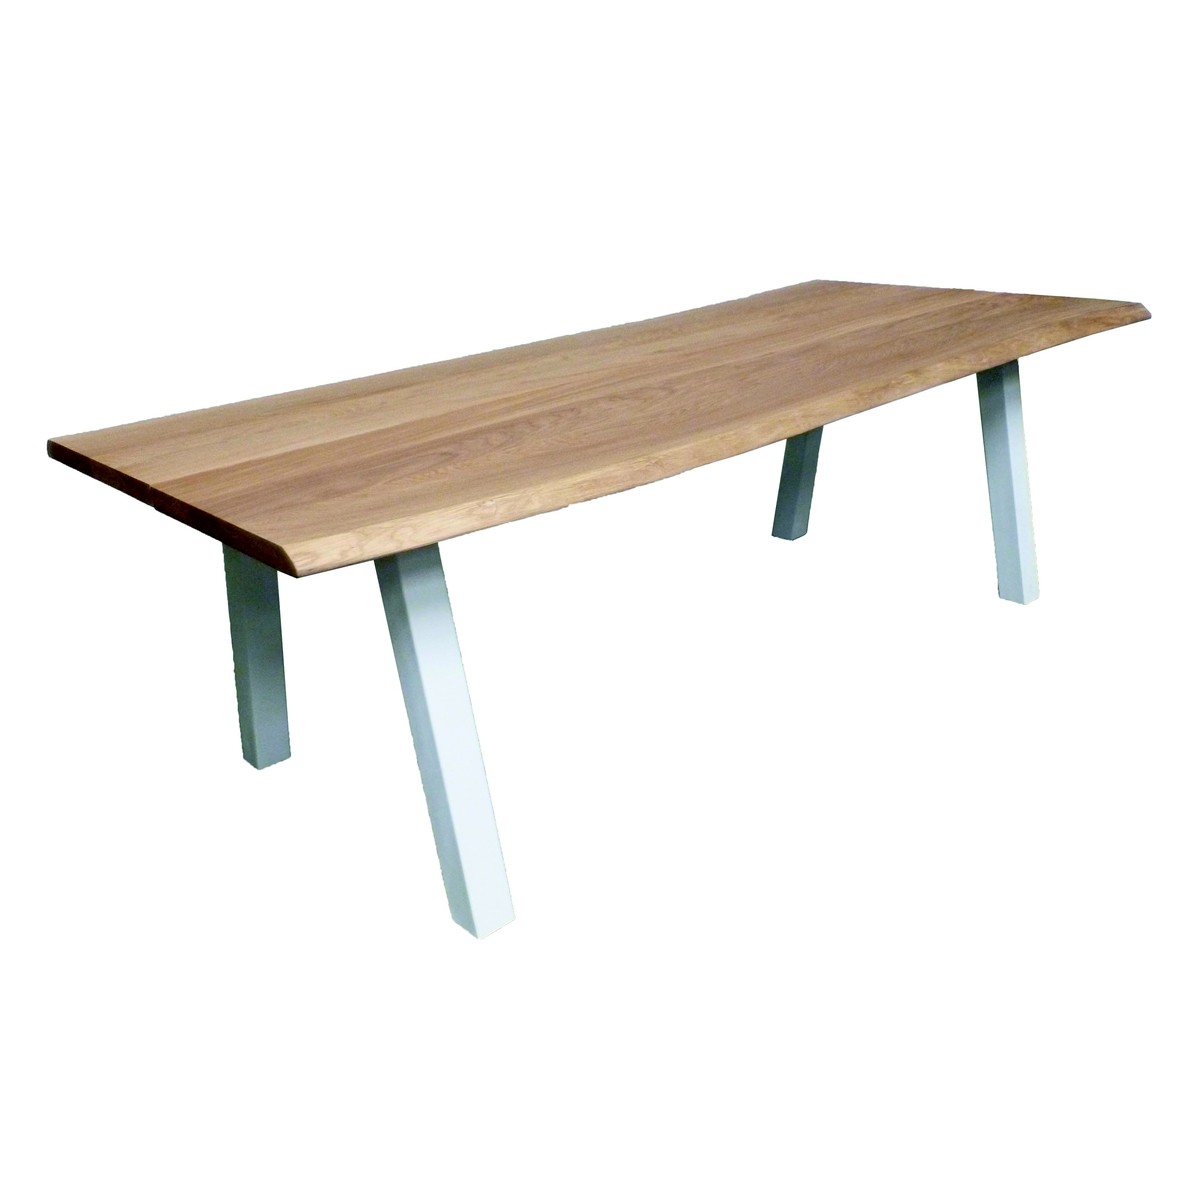   Table Flyn Trunk ouverte rectangulaire  160x100x77cm